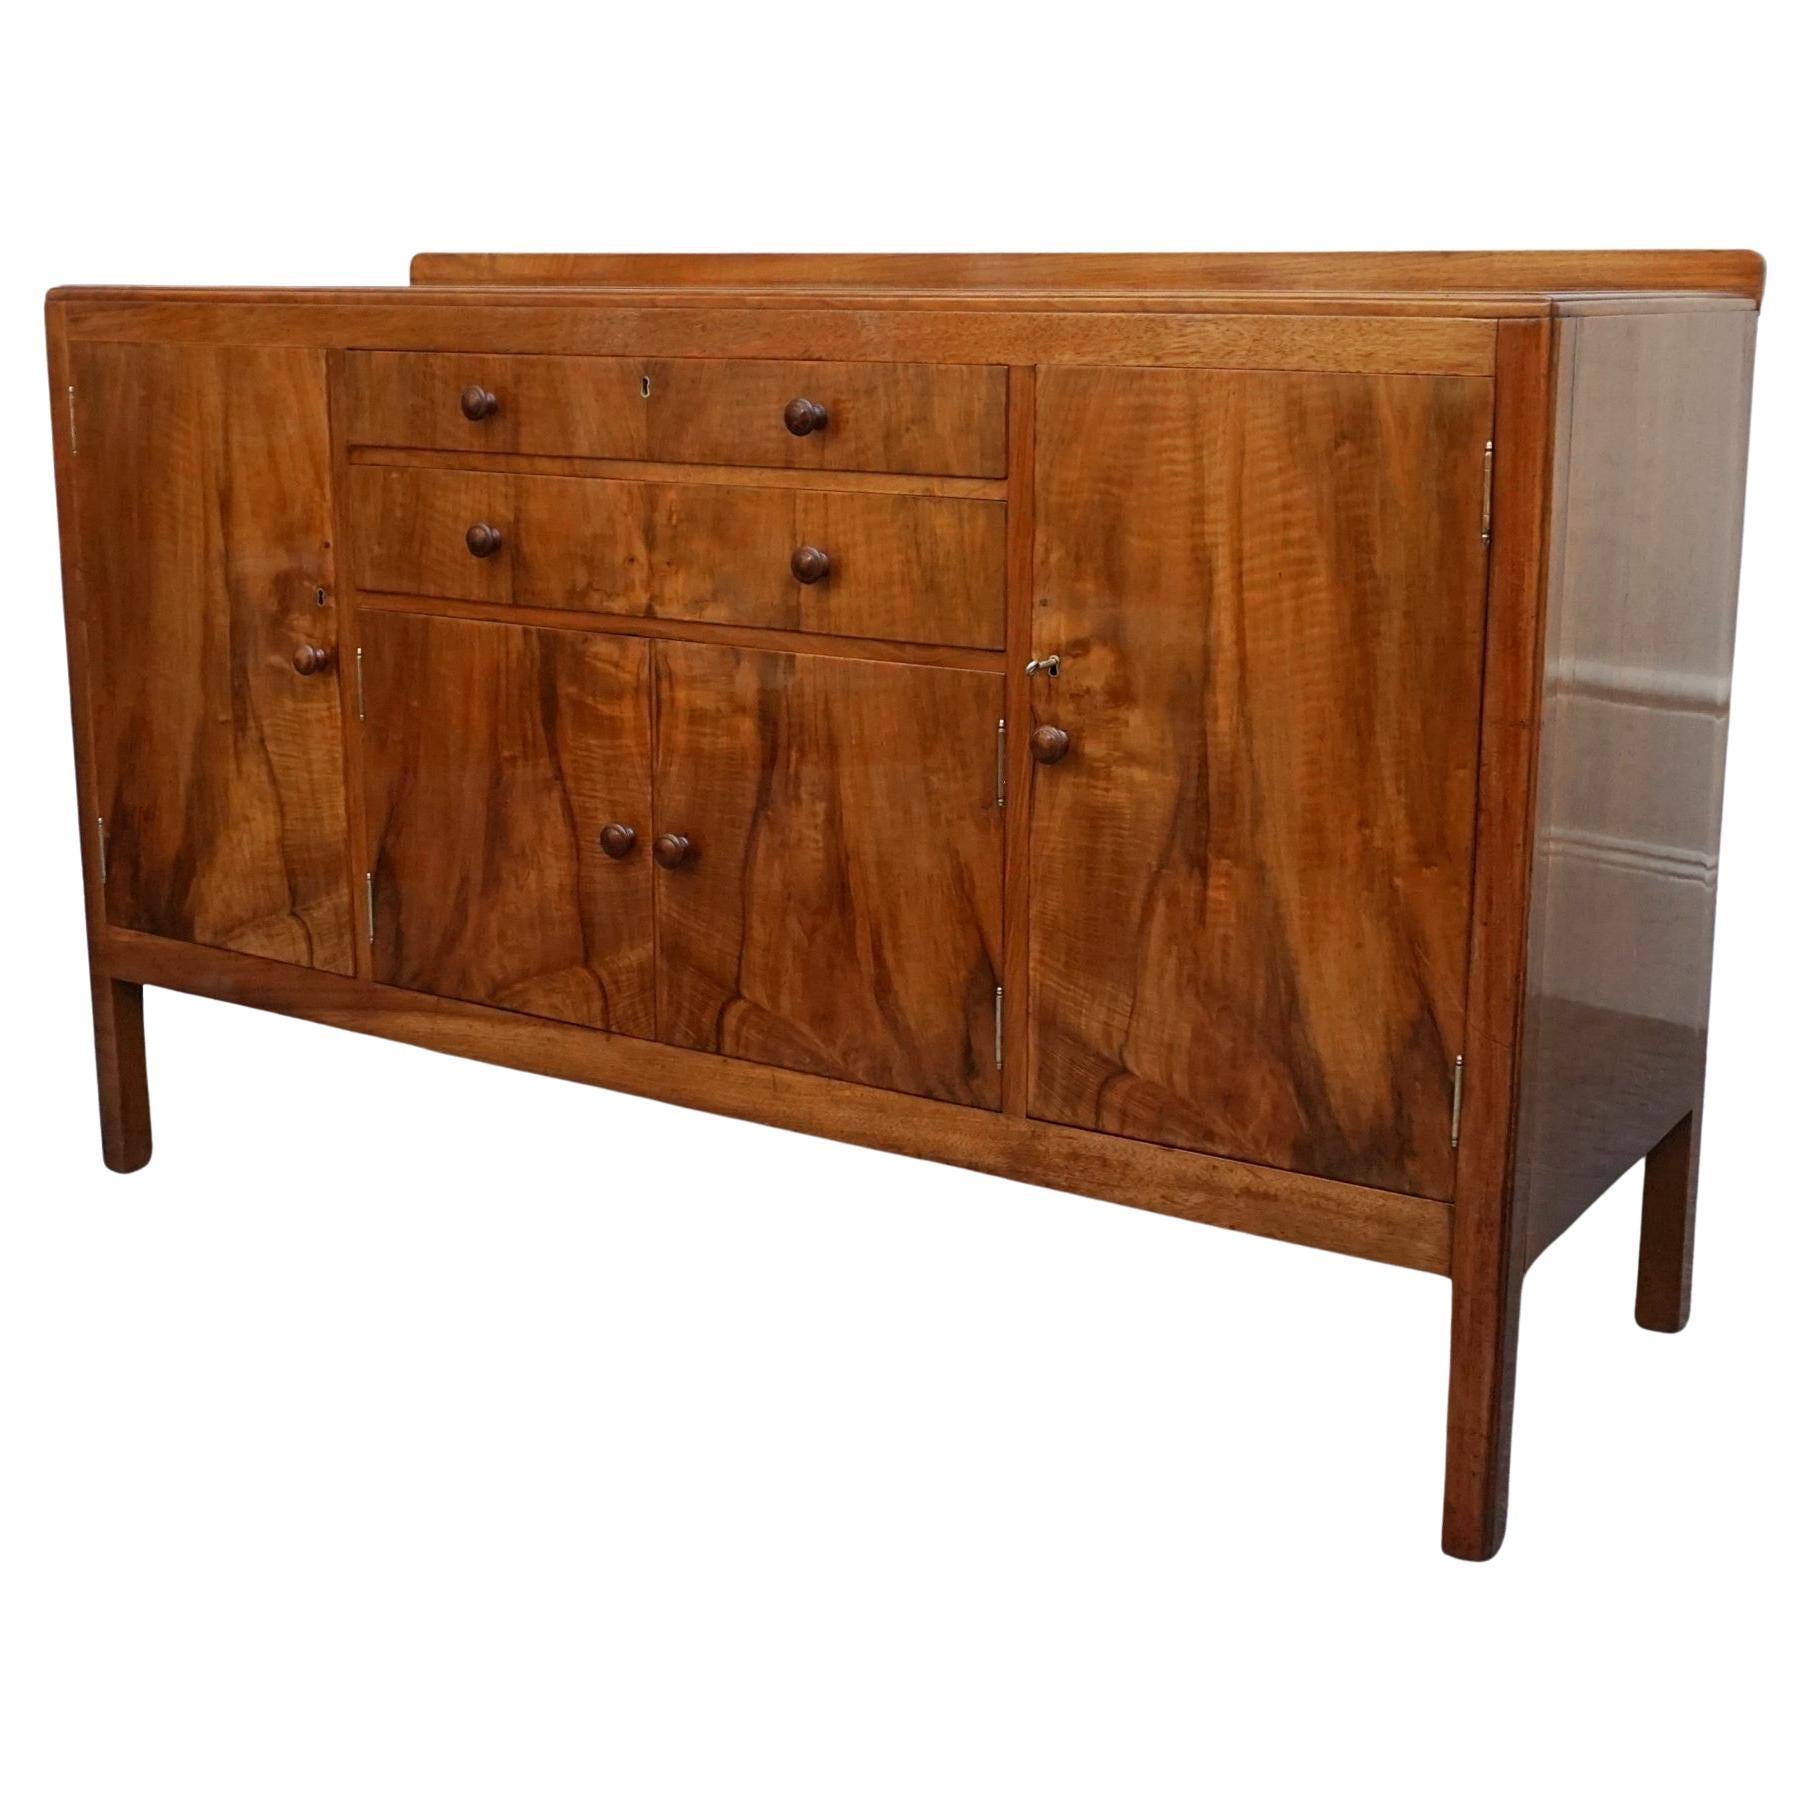 Vintage Art Deco Sideboard by Heal's of London Burr and Figured Walnut For Sale